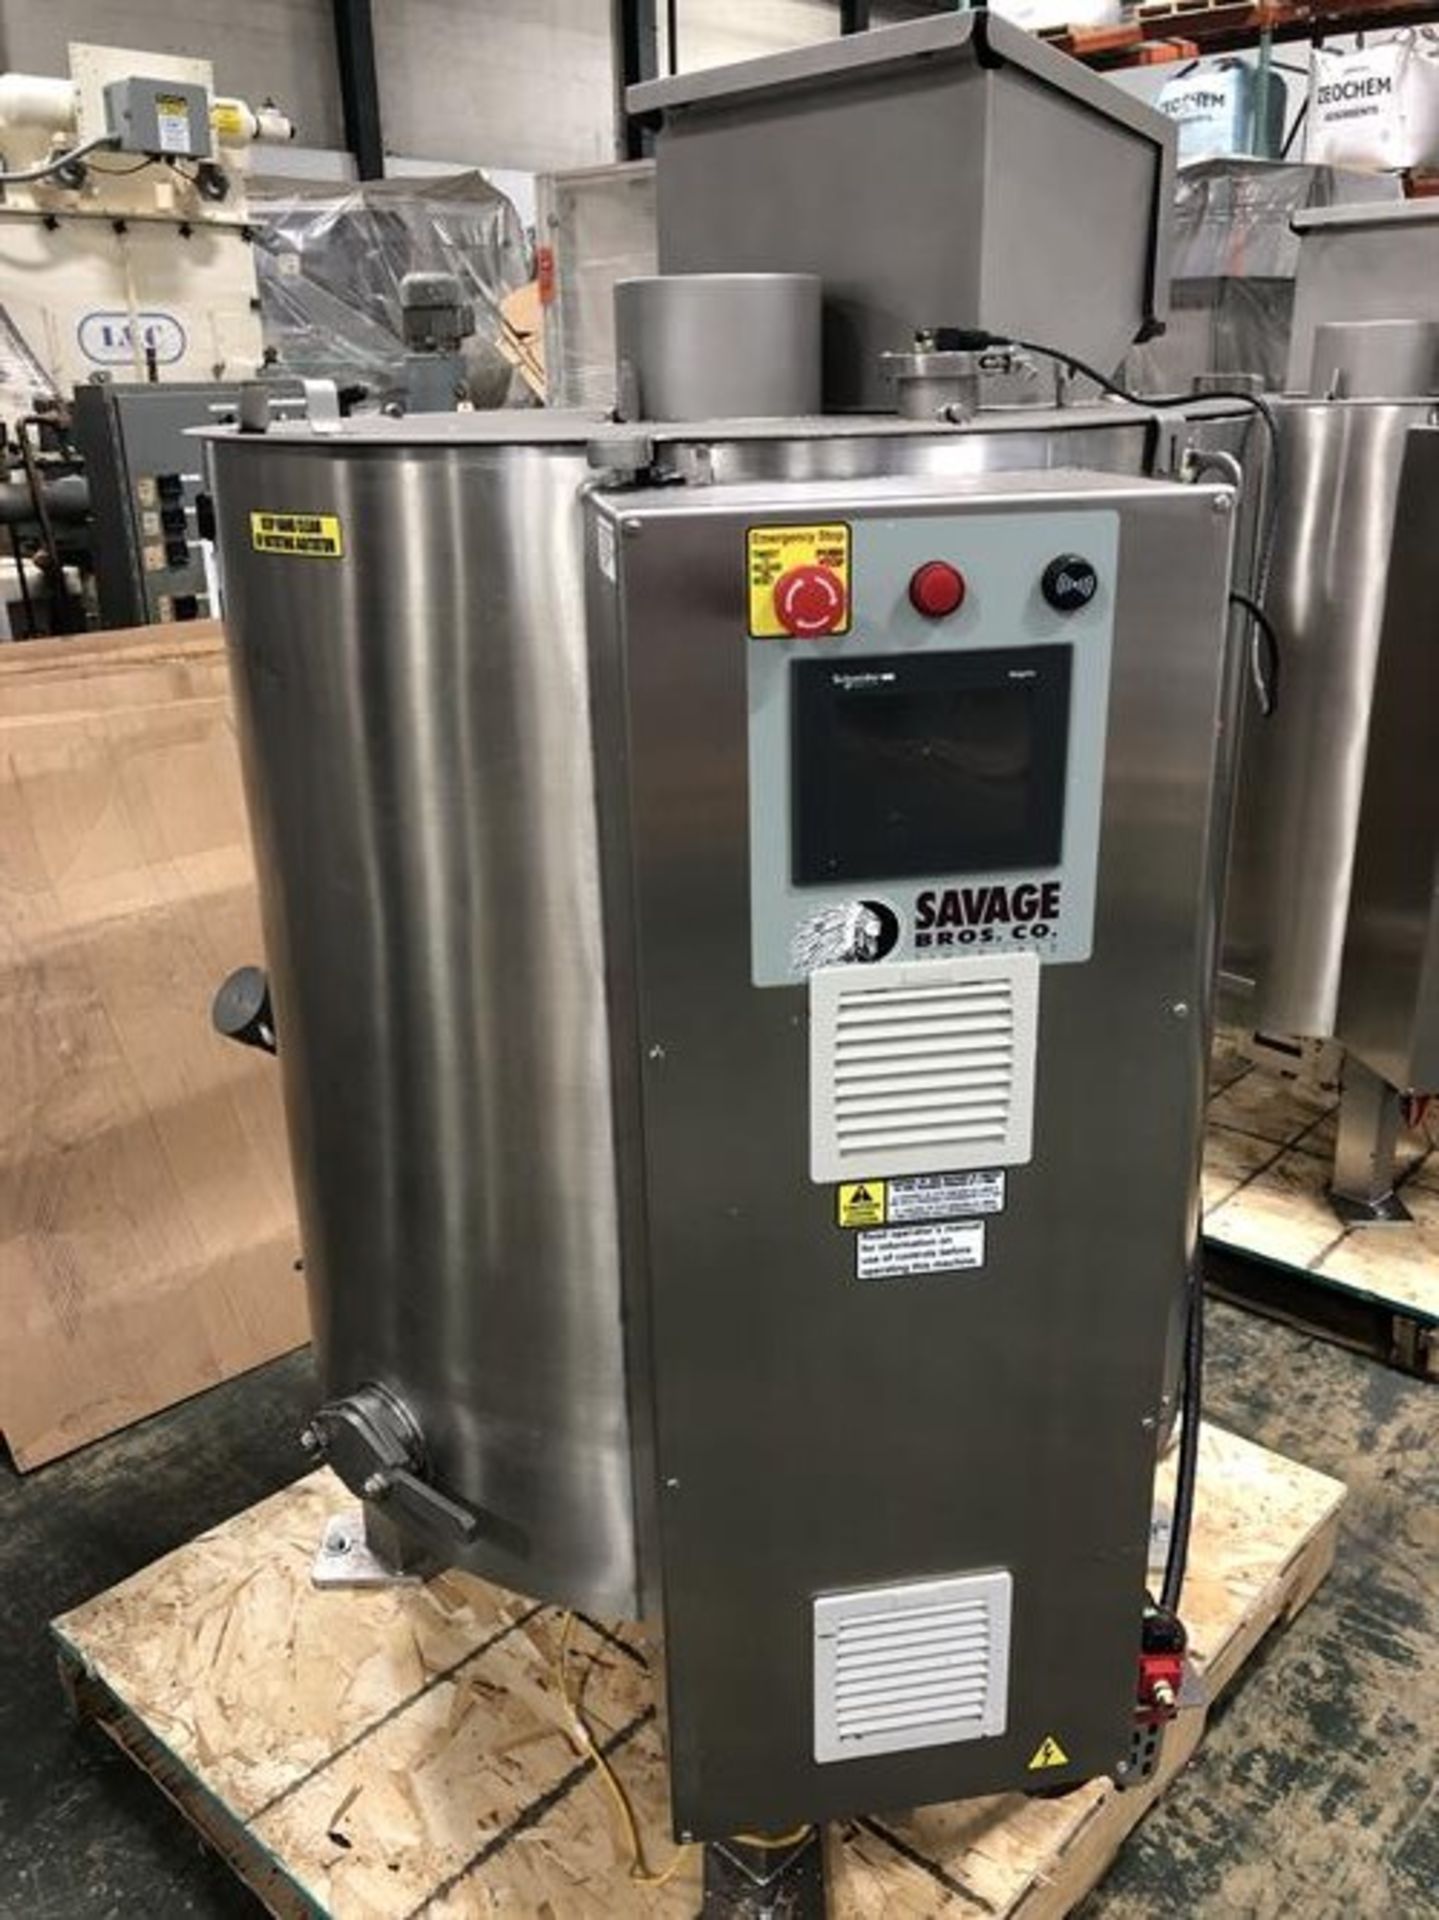 Savage 1250-lb Stainless Steel Chocolate Melter with Transfer Pump - Savage air-operated transfer